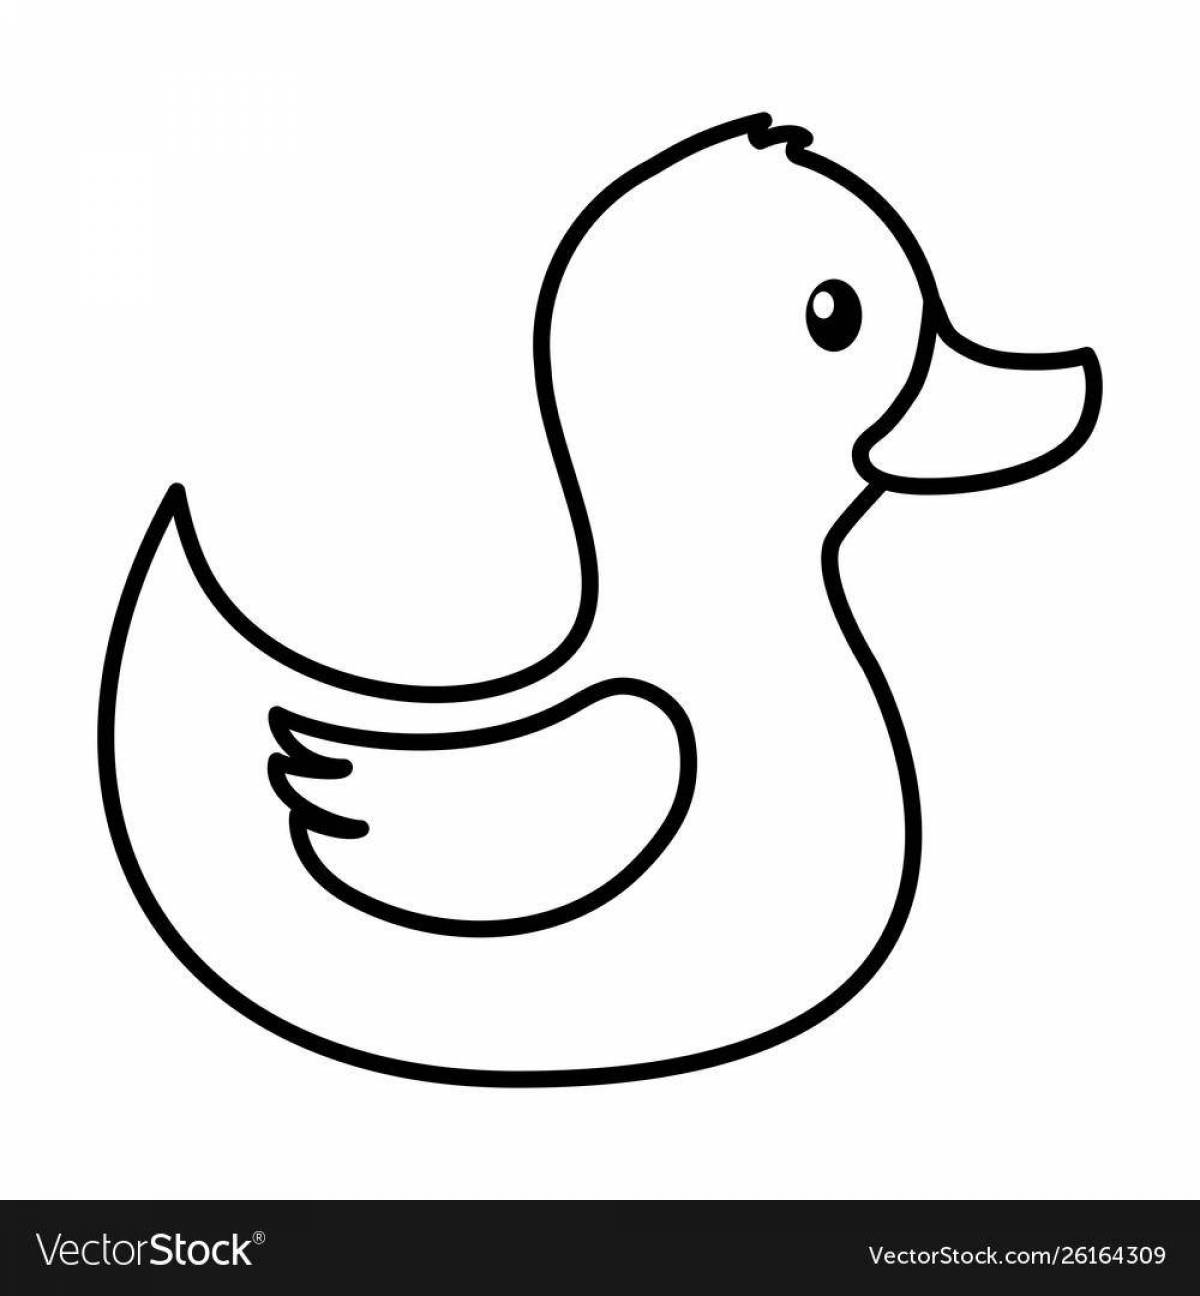 Fun Dymkovo duck coloring book for younger children